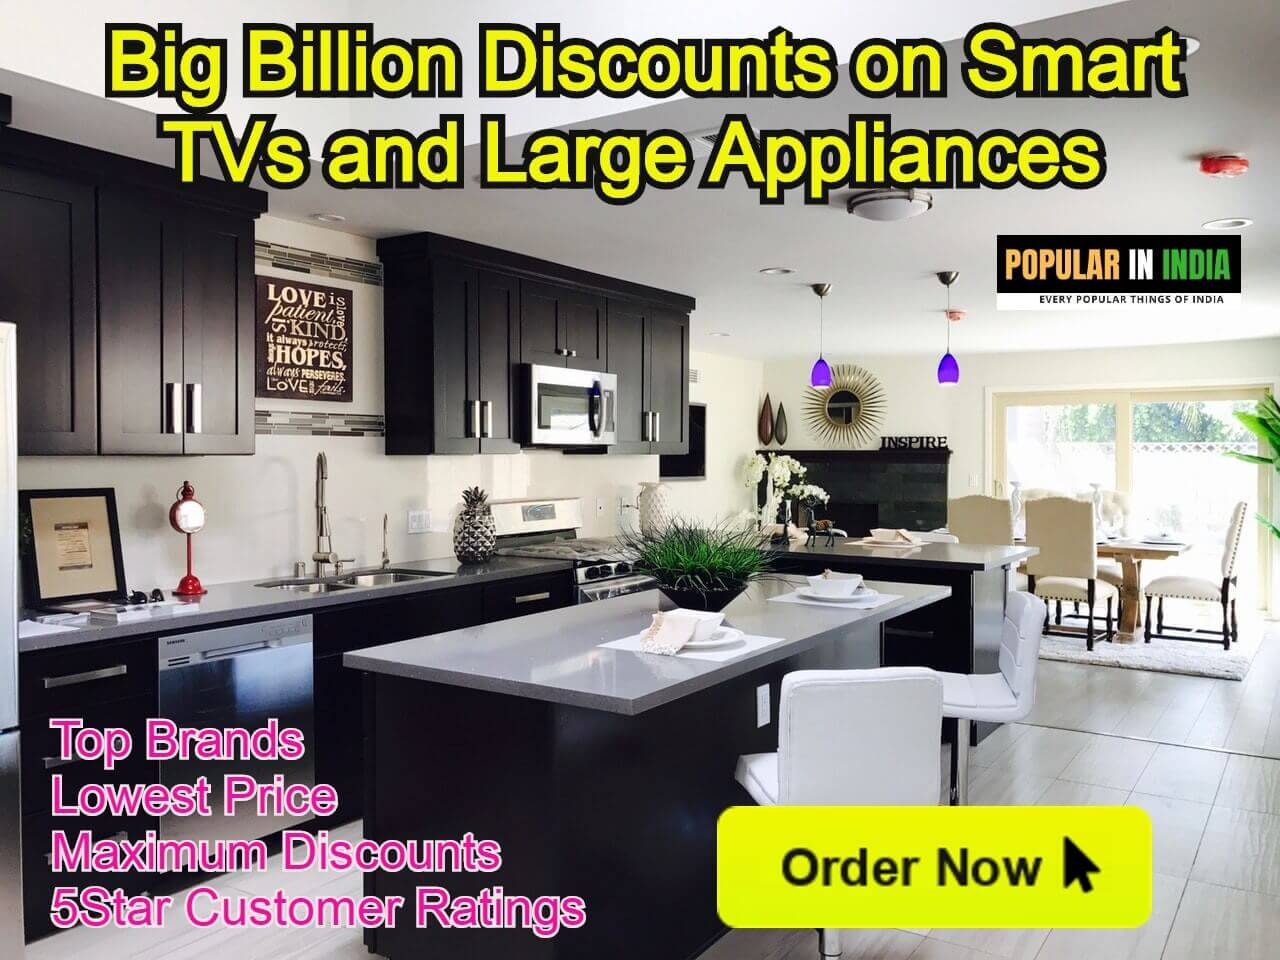 Big Billion Discounts on Smart TVs and Large Appliances UP to 80 Percent